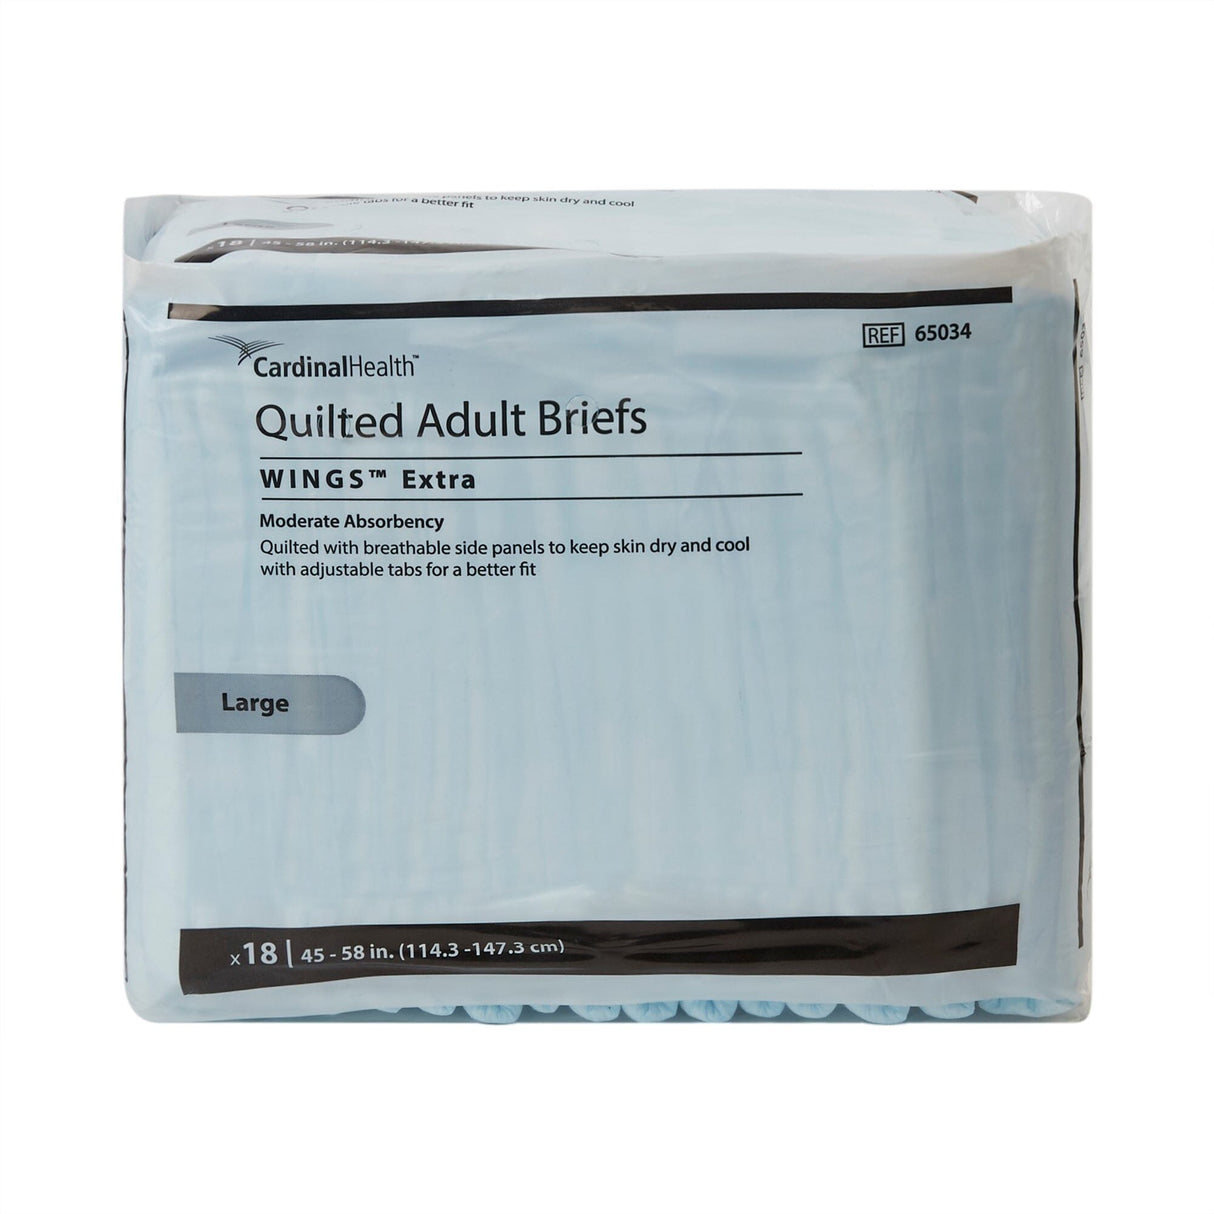 Image of WINGS Extra Quilted Adult Brief — Moderate Absorbency